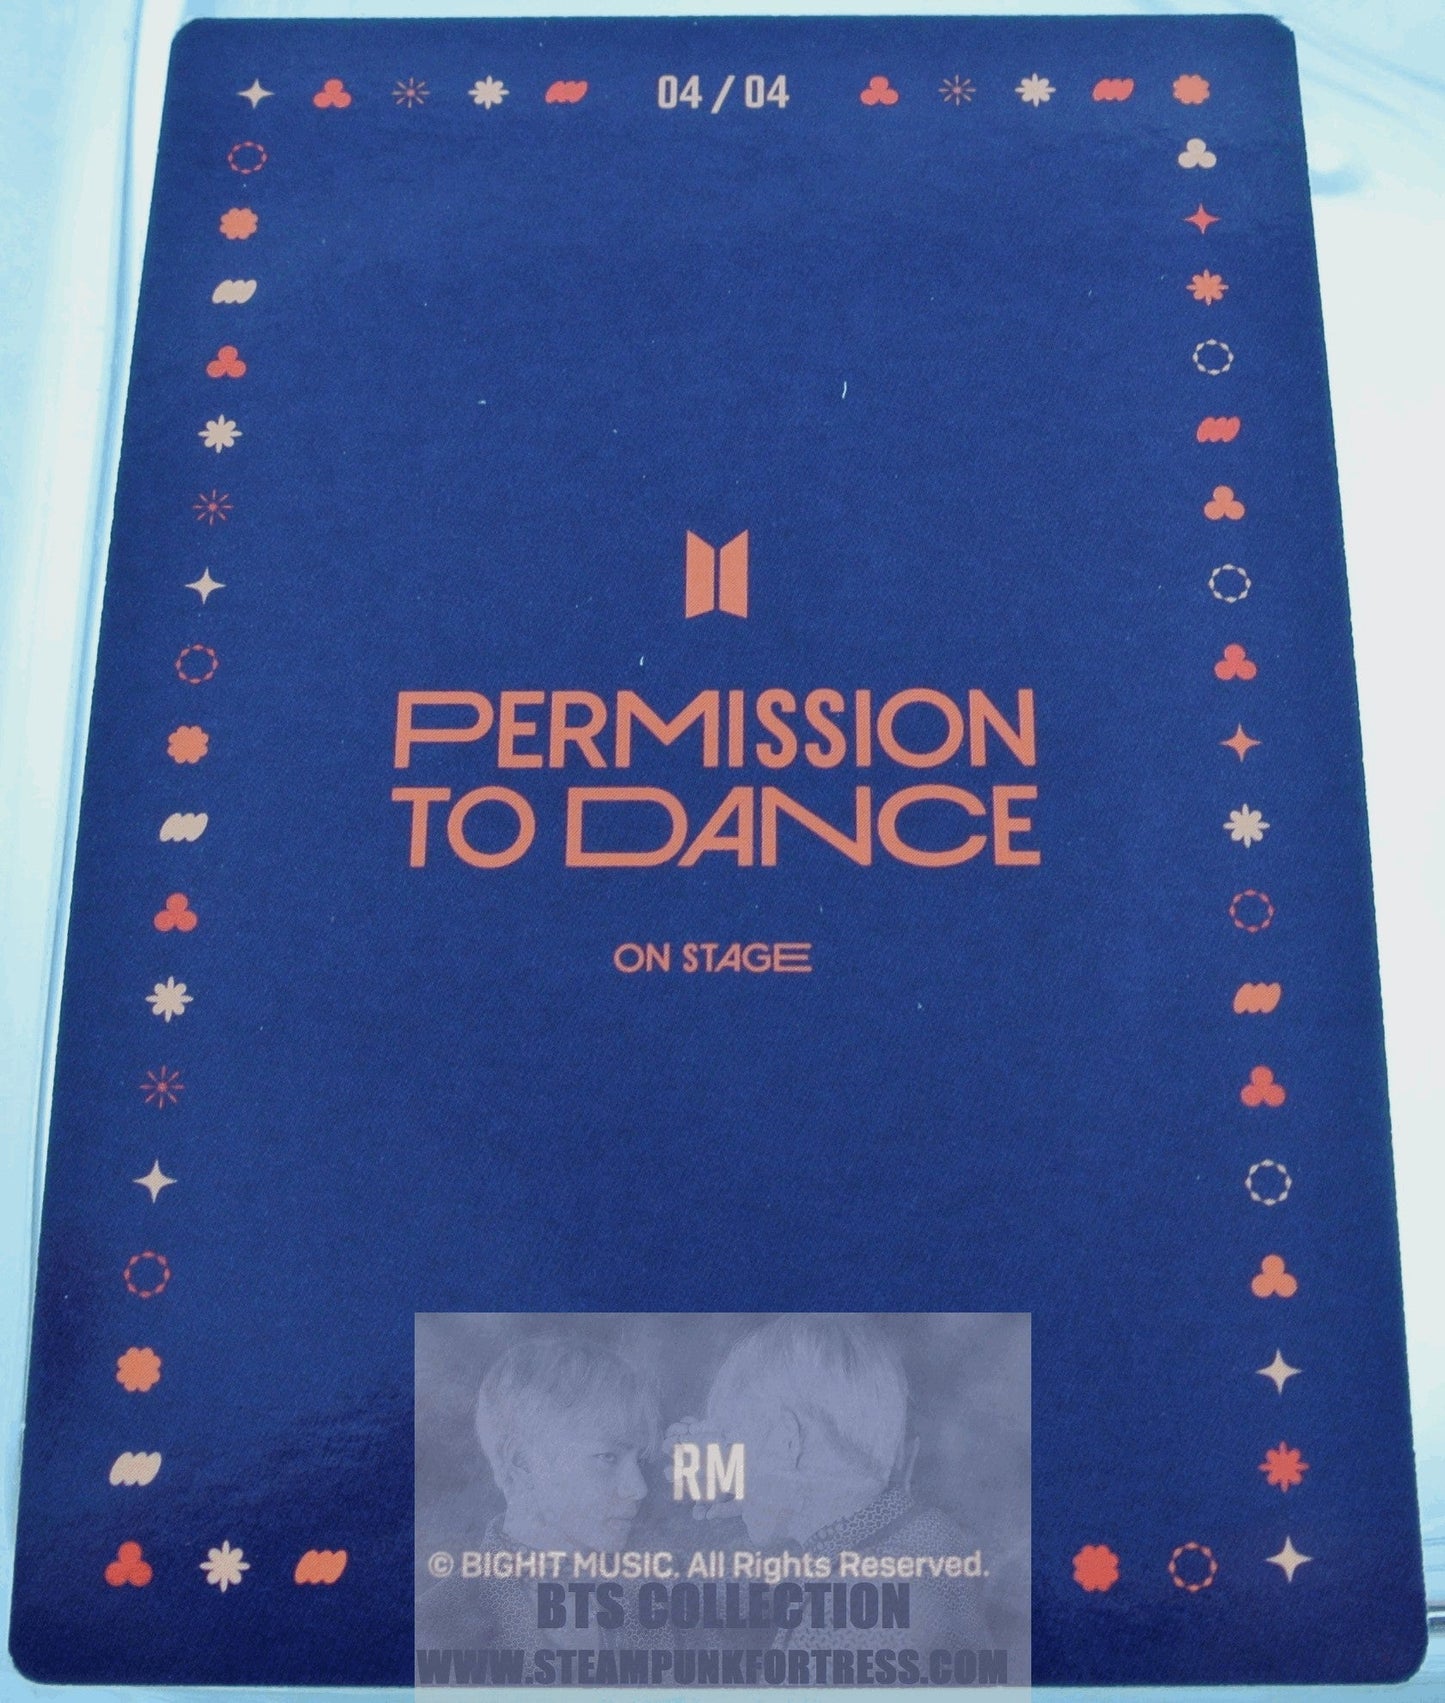 BTS RM KIM NAMJOON NAM-JOON 2022 PERMISSION TO DANCE ON STAGE SEOUL PTD #4 OF 4 PHOTOCARD PHOTO CARD NEW OFFICIAL MERCHANDISE